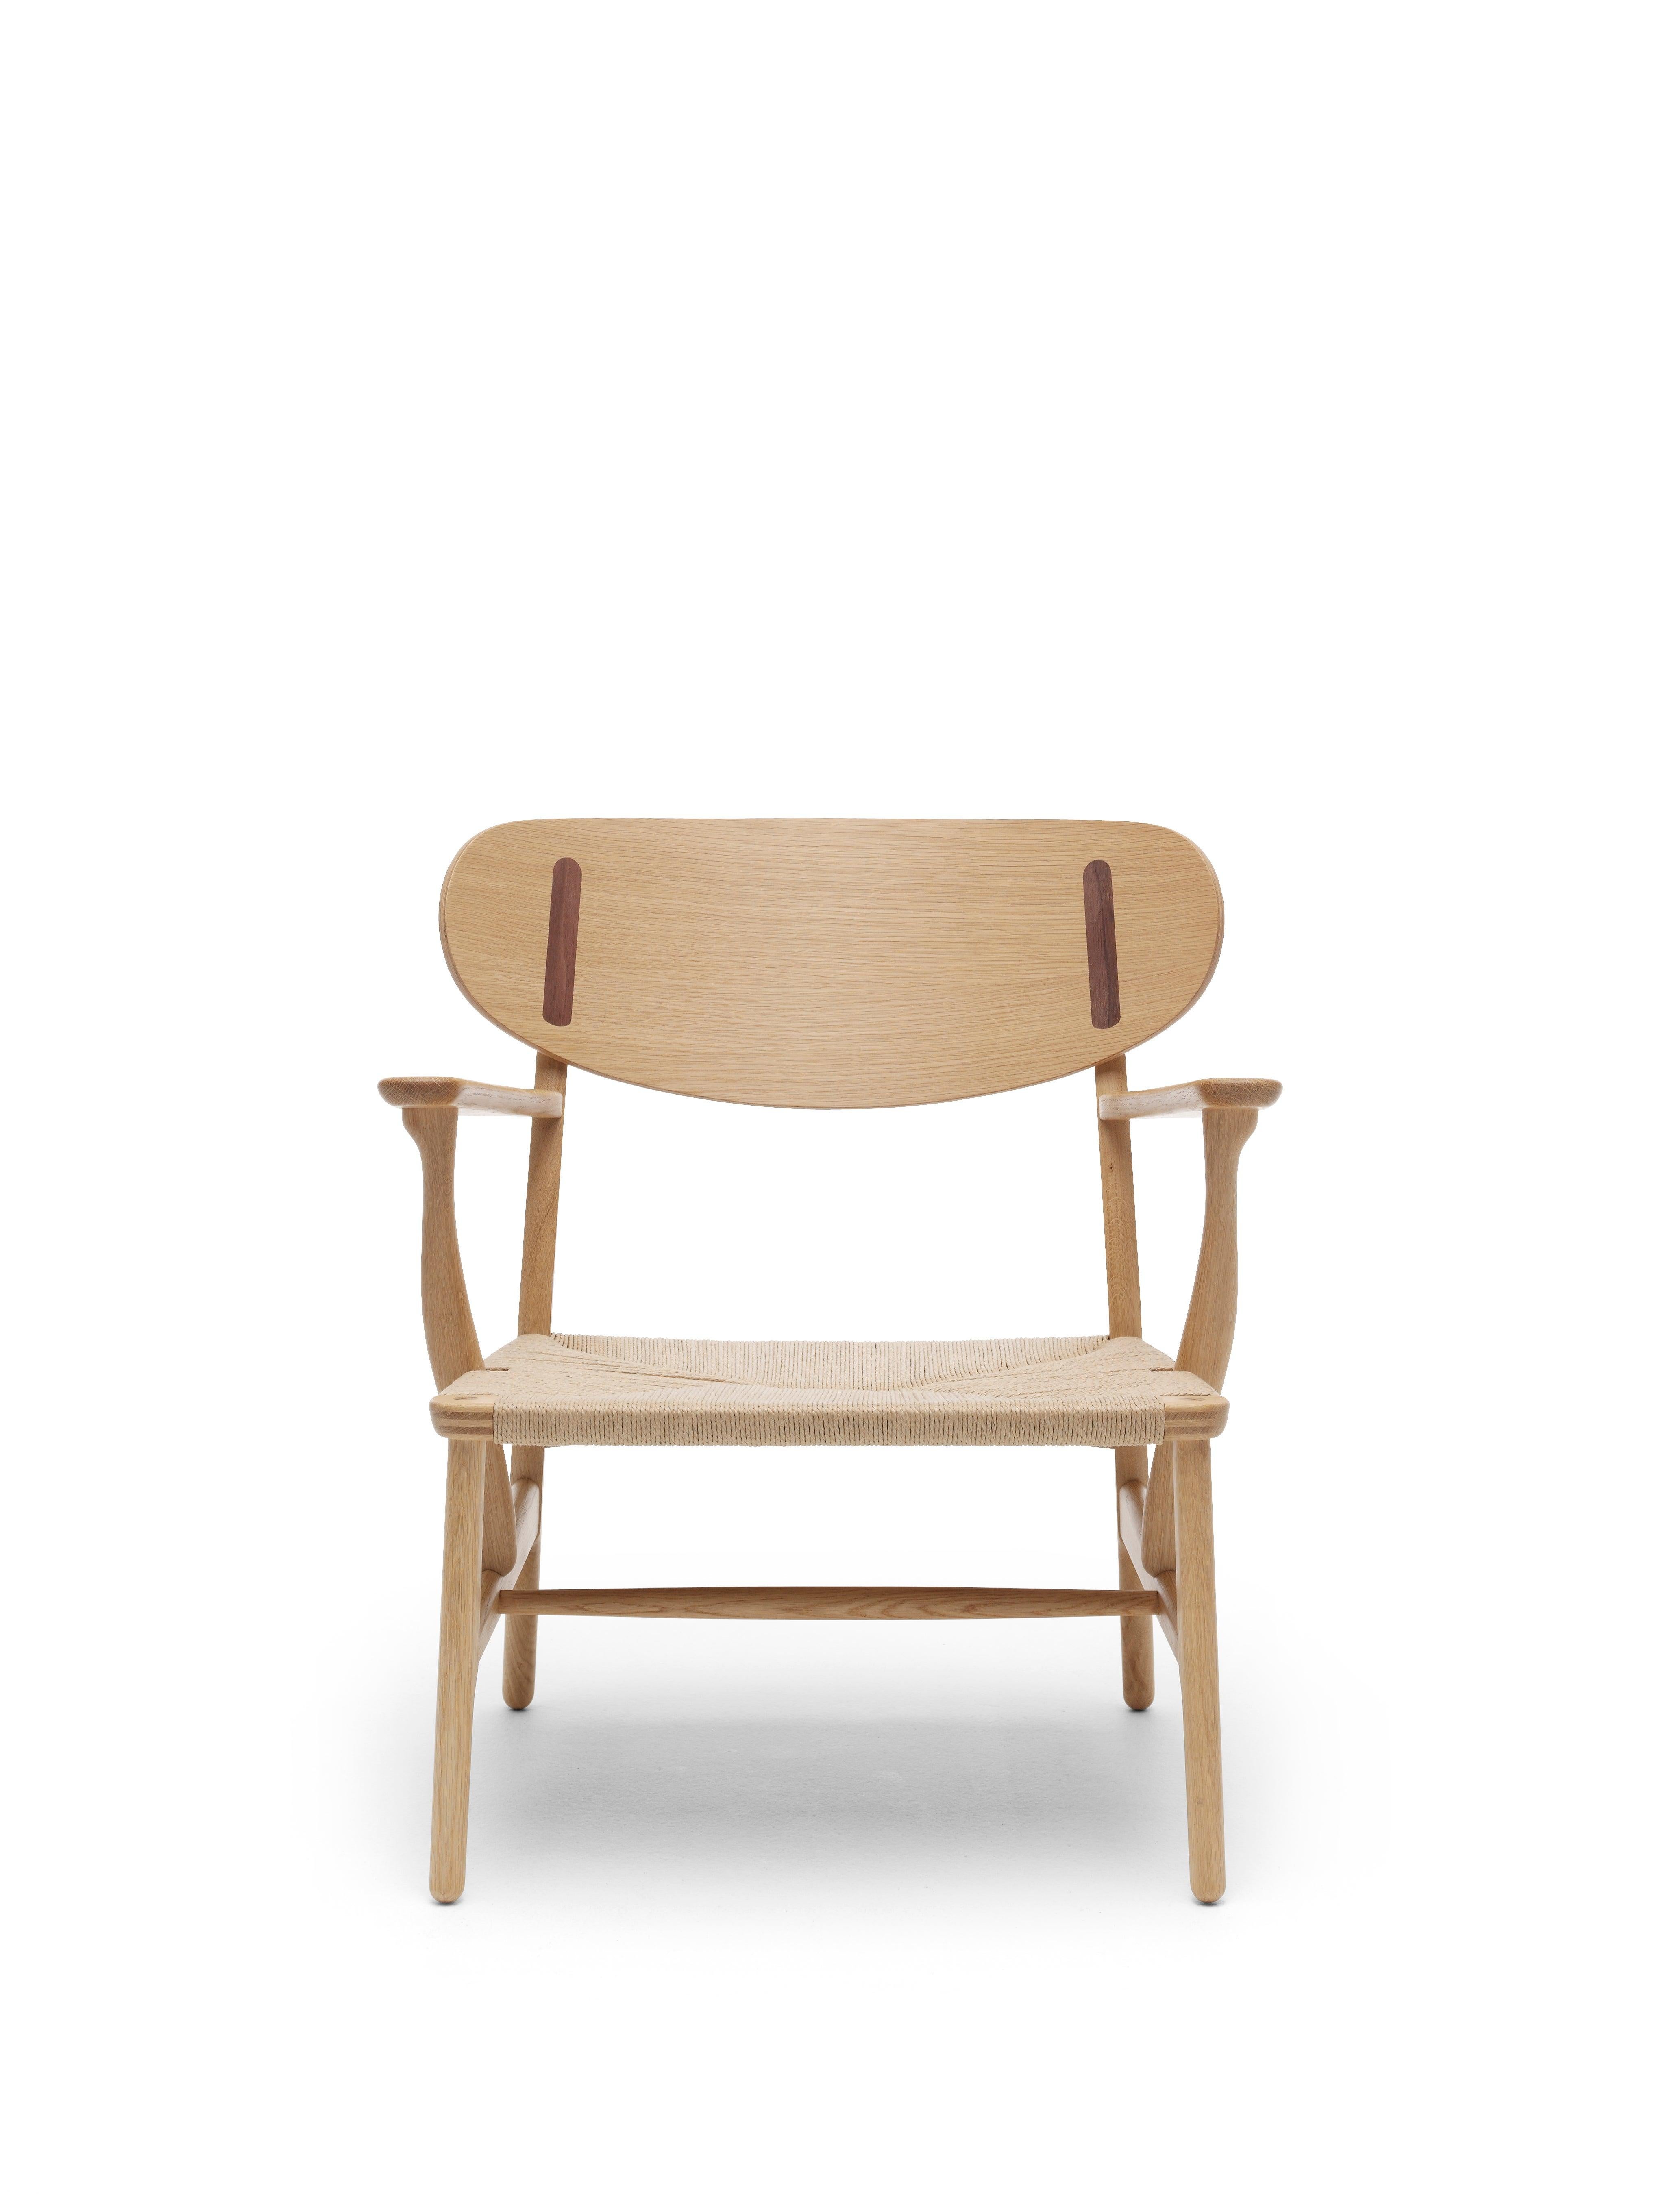 The CH22 lounge chair by Hans J. Wegner was brought back into production by Carl Hansen & SÃ¸n in 2016. It features elegant armrests, an envelope-woven paper cord seat, and a distinctive back shell in form-pressed veneer with striking oblong cover